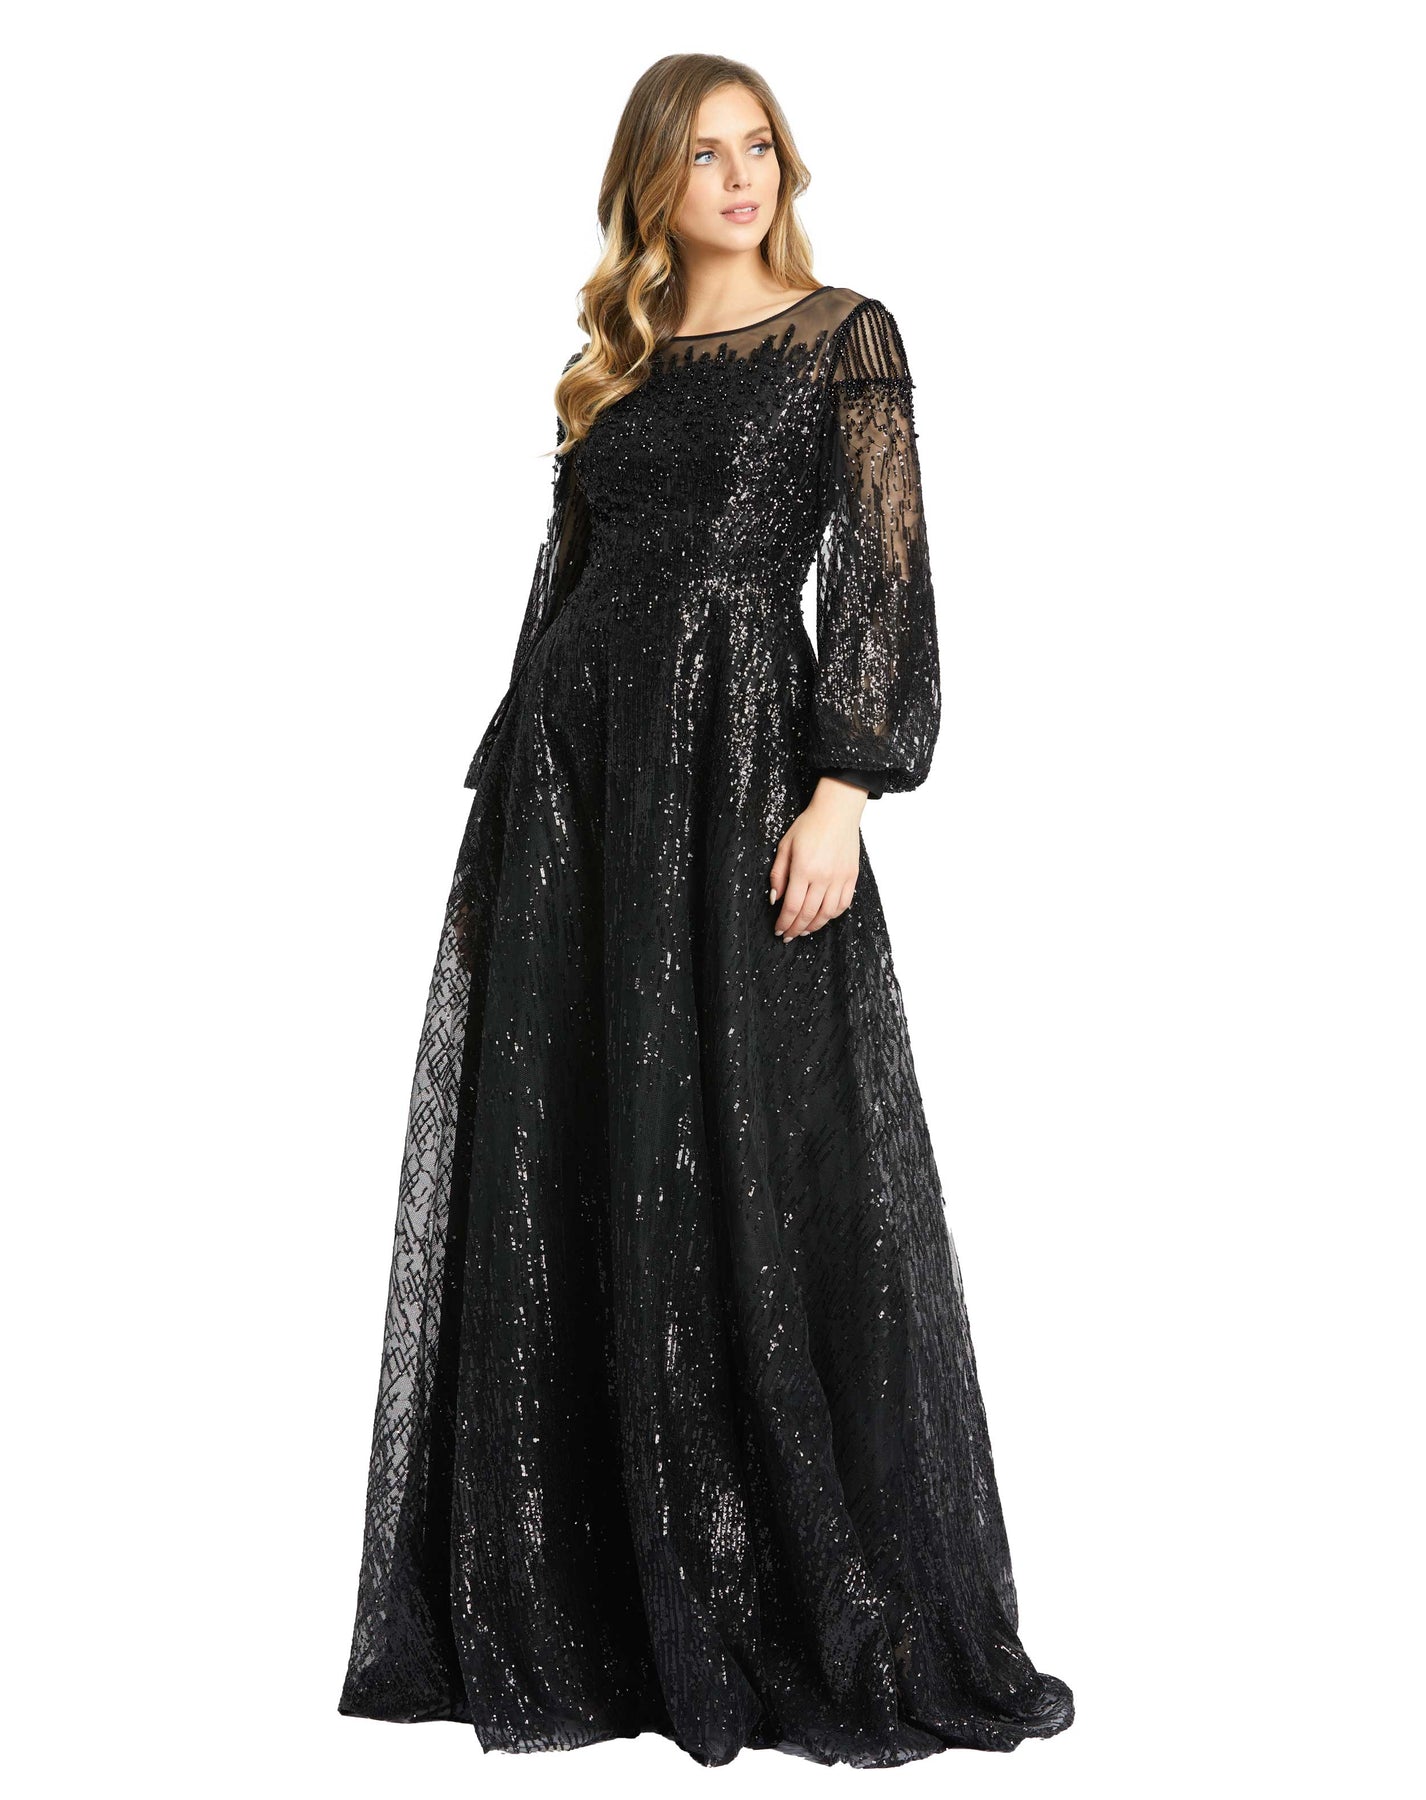 Jewel Encrusted Illusion Long Sleeve A Line Gown – Mac Duggal